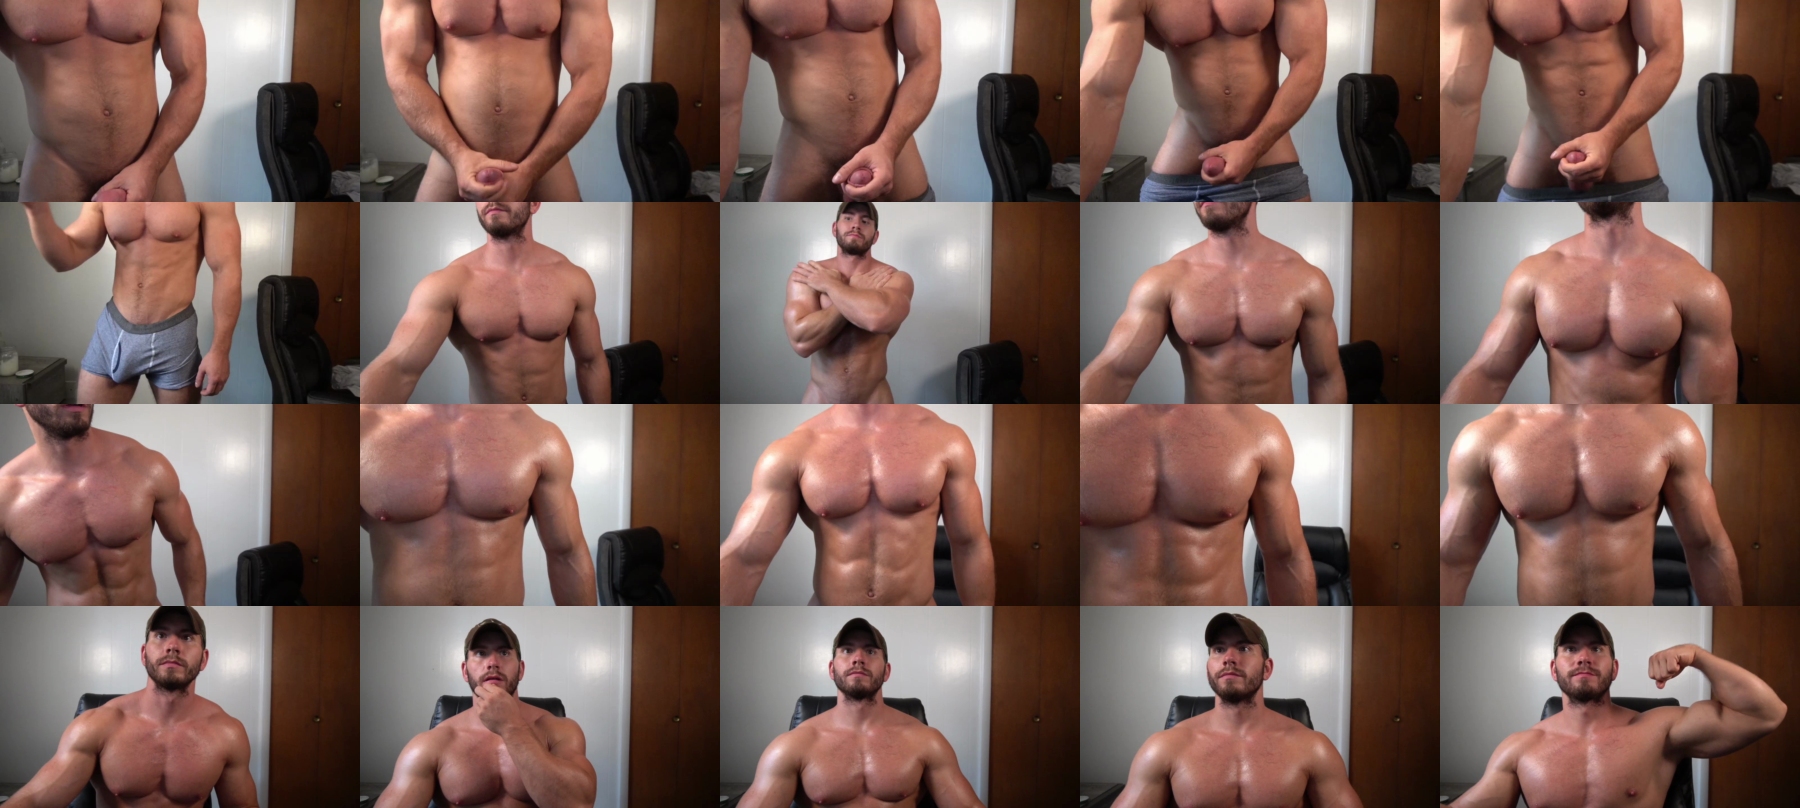 Hotmuscles6t9  14-08-2021 Male Topless